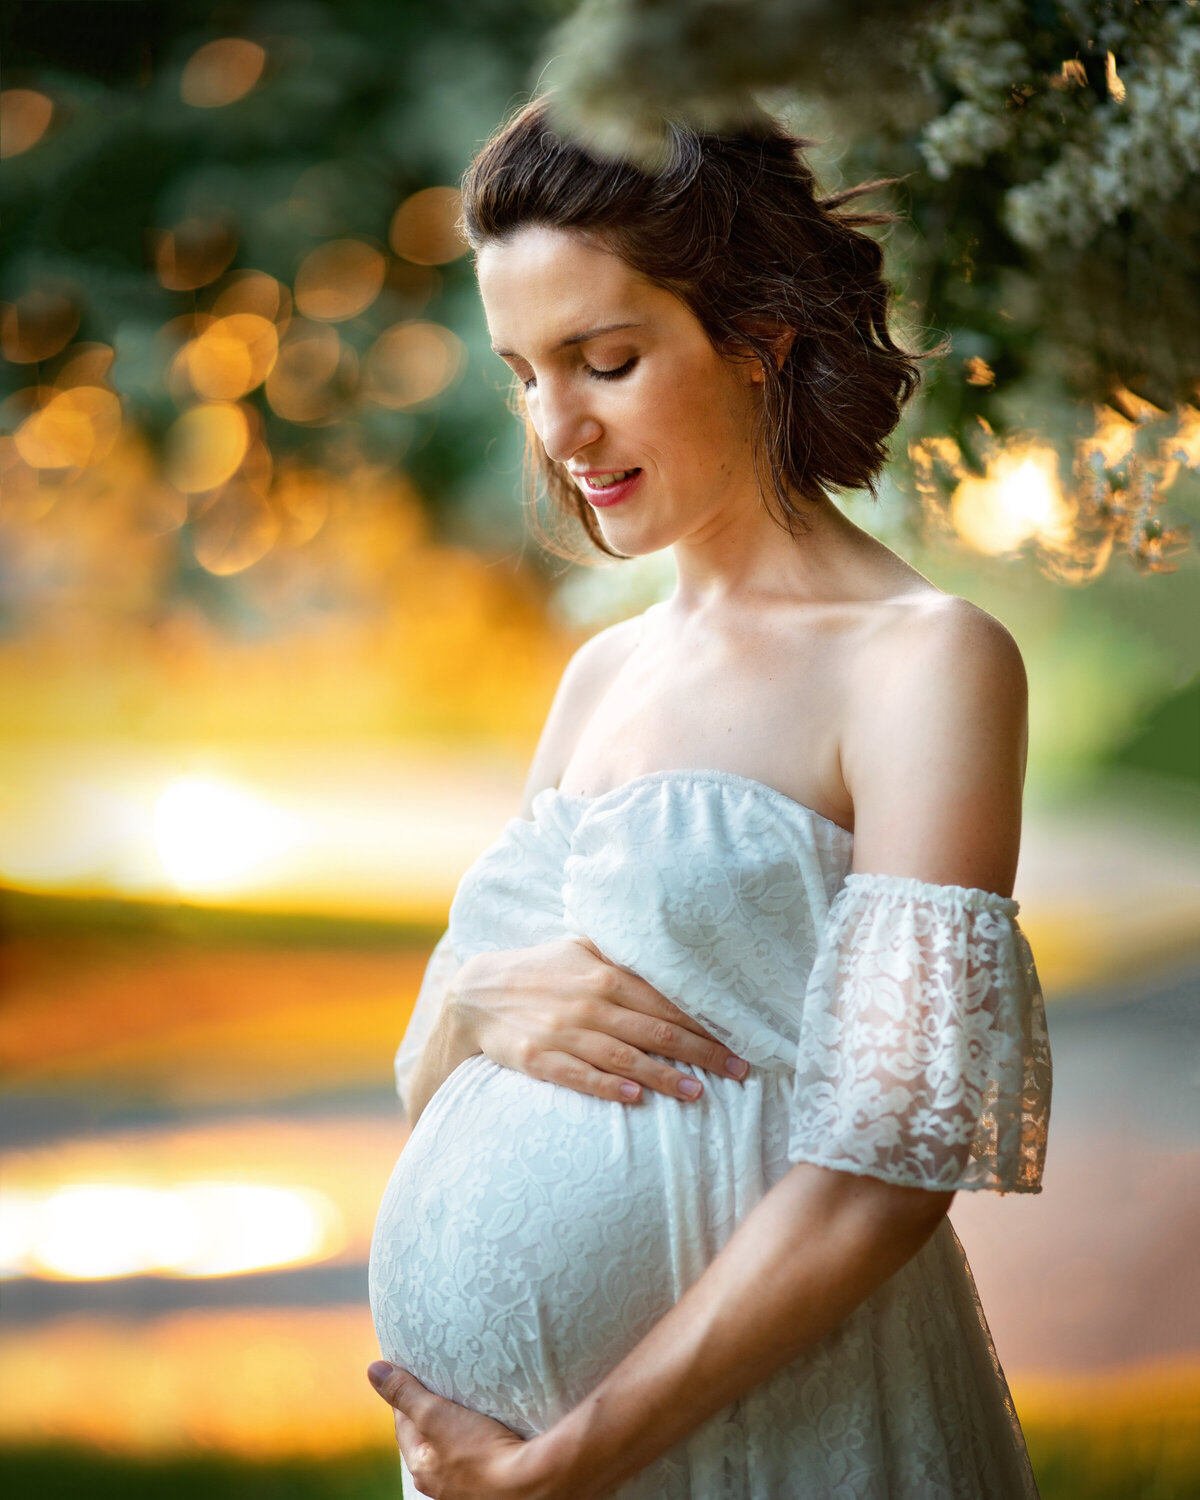 Woman with dark, short hair holding her pregnant belly.  She is smiling and standing under a crepe myrtle tree.  She is wearing a white dress and it is during golden hour.